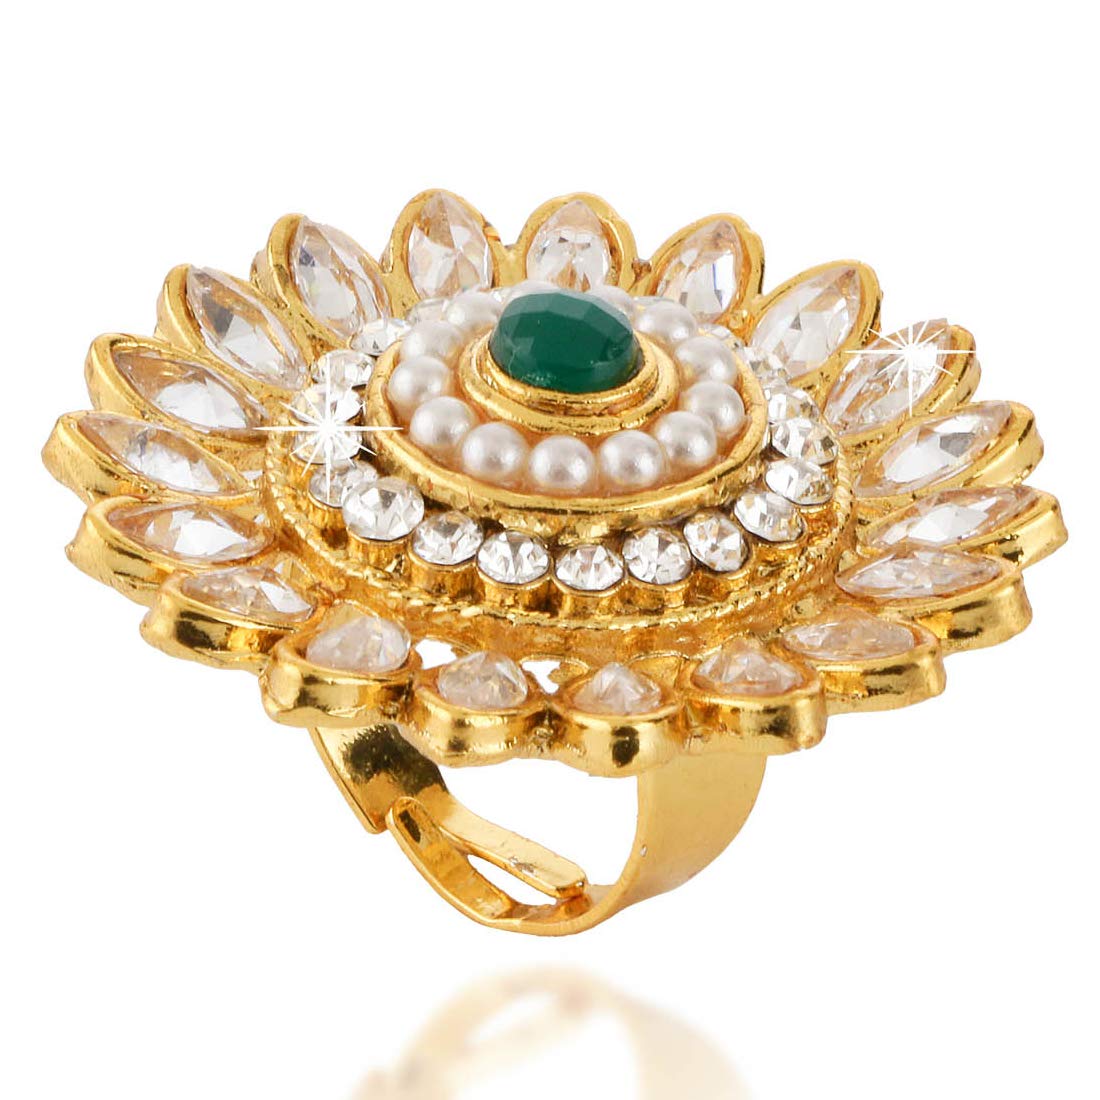 Luxury Gold Plated Cocktail Ring For Women Simulated Diamond Painting, Full  Stone Jtv Jewelry In Big Silver, Size 5 10 From Fashion7house, $21.44 |  DHgate.Com